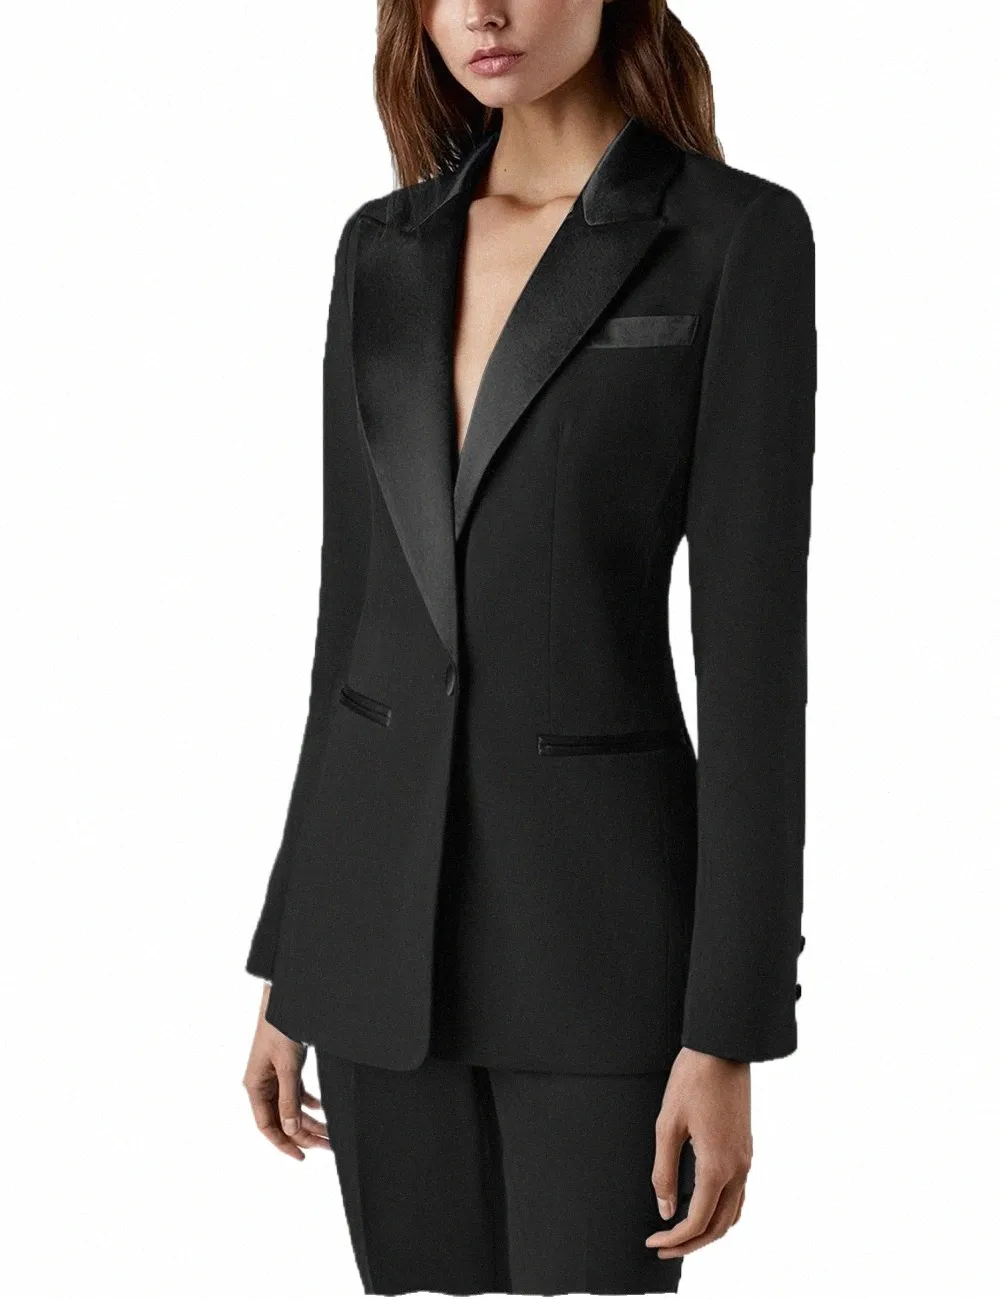 lansboter Black Women Suit 2 Piece Outfits for Wedding Tuxedos Party Office Work Slim Fit Busin Lady Suit Blazer with Pants A9tZ#